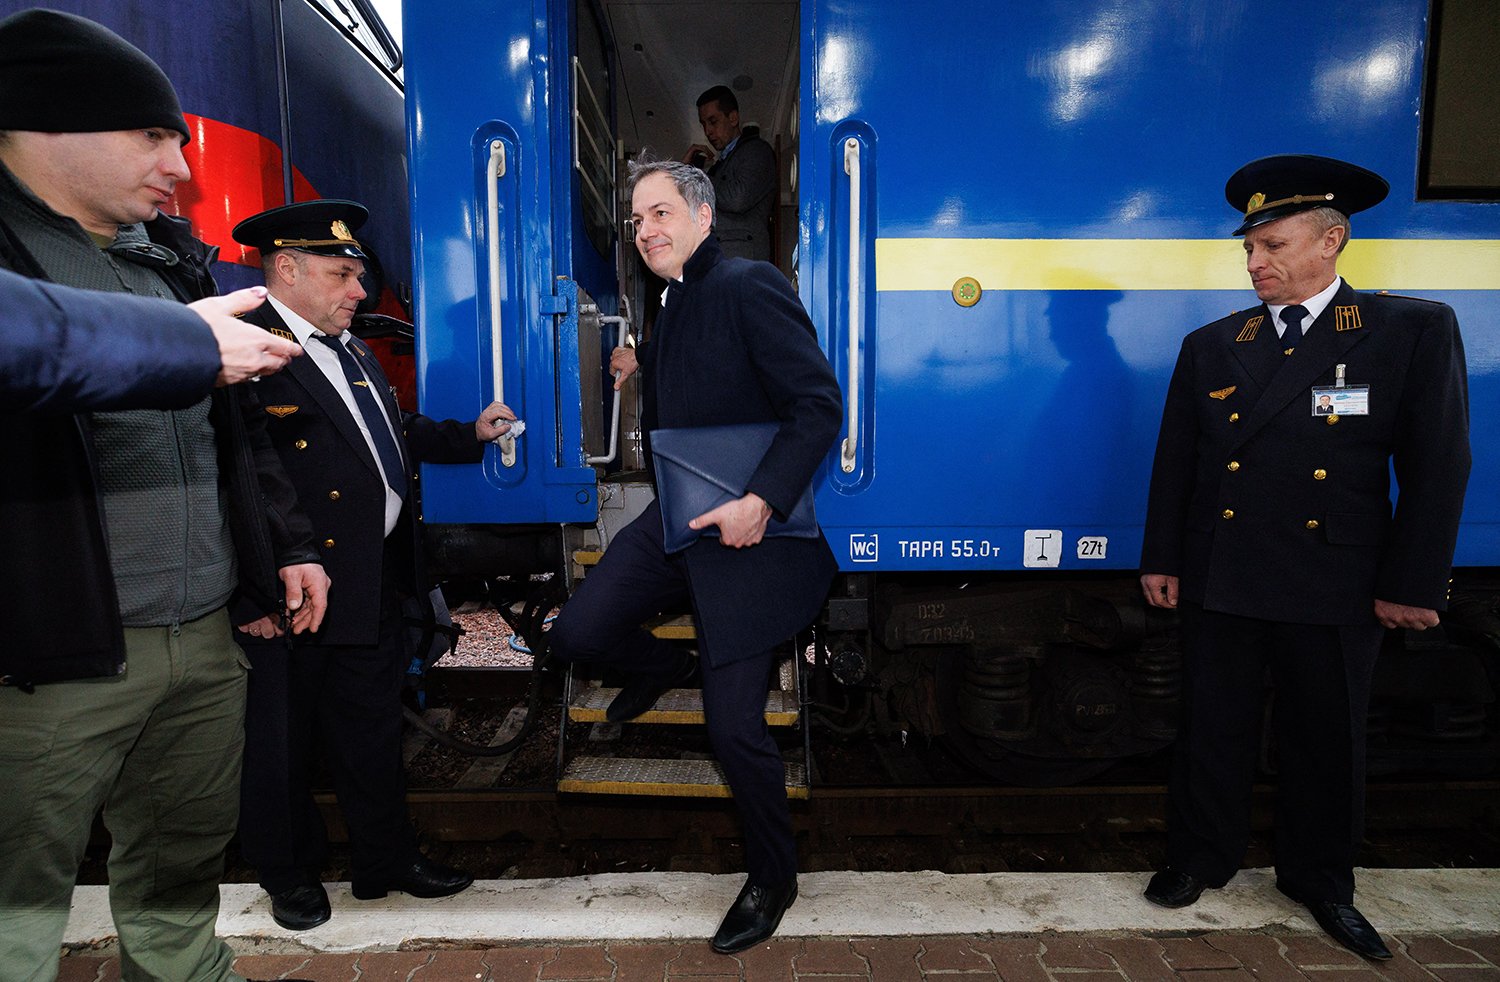 Belgian Prime Minister Alexander De Croo smiles as he steps off a blue train with a yellow stripe in Kyiv, Ukraine, flanked by two men in black uniforms.